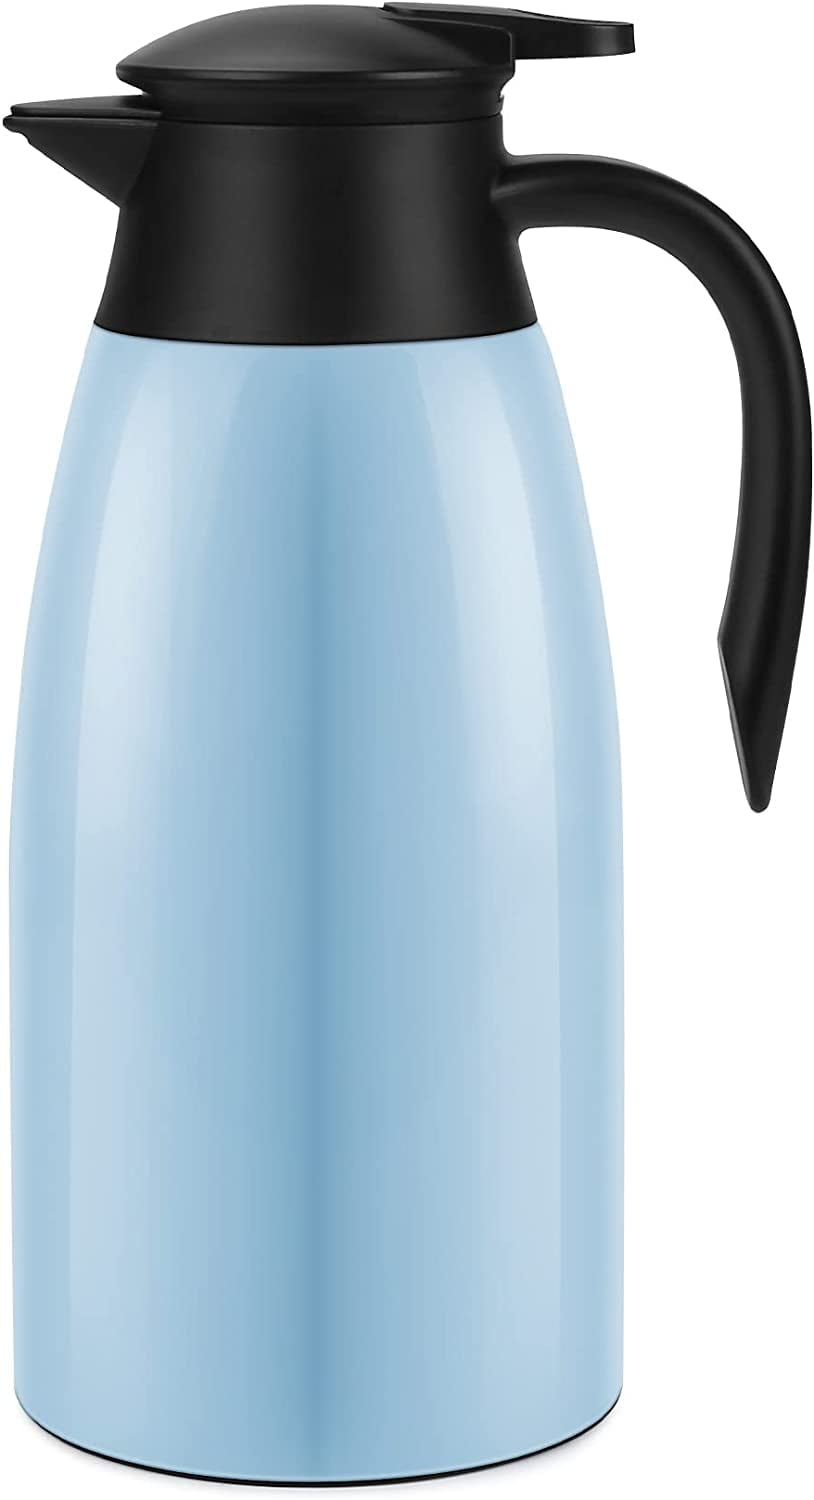 Thermal Coffee Carafe Dispenser by Heritage66 Triple Wall Stainless Steel  Thermos Vacuum insulated/Flask Hot Coffee 12 hours Tea, Water 2 Liter /68  OZ